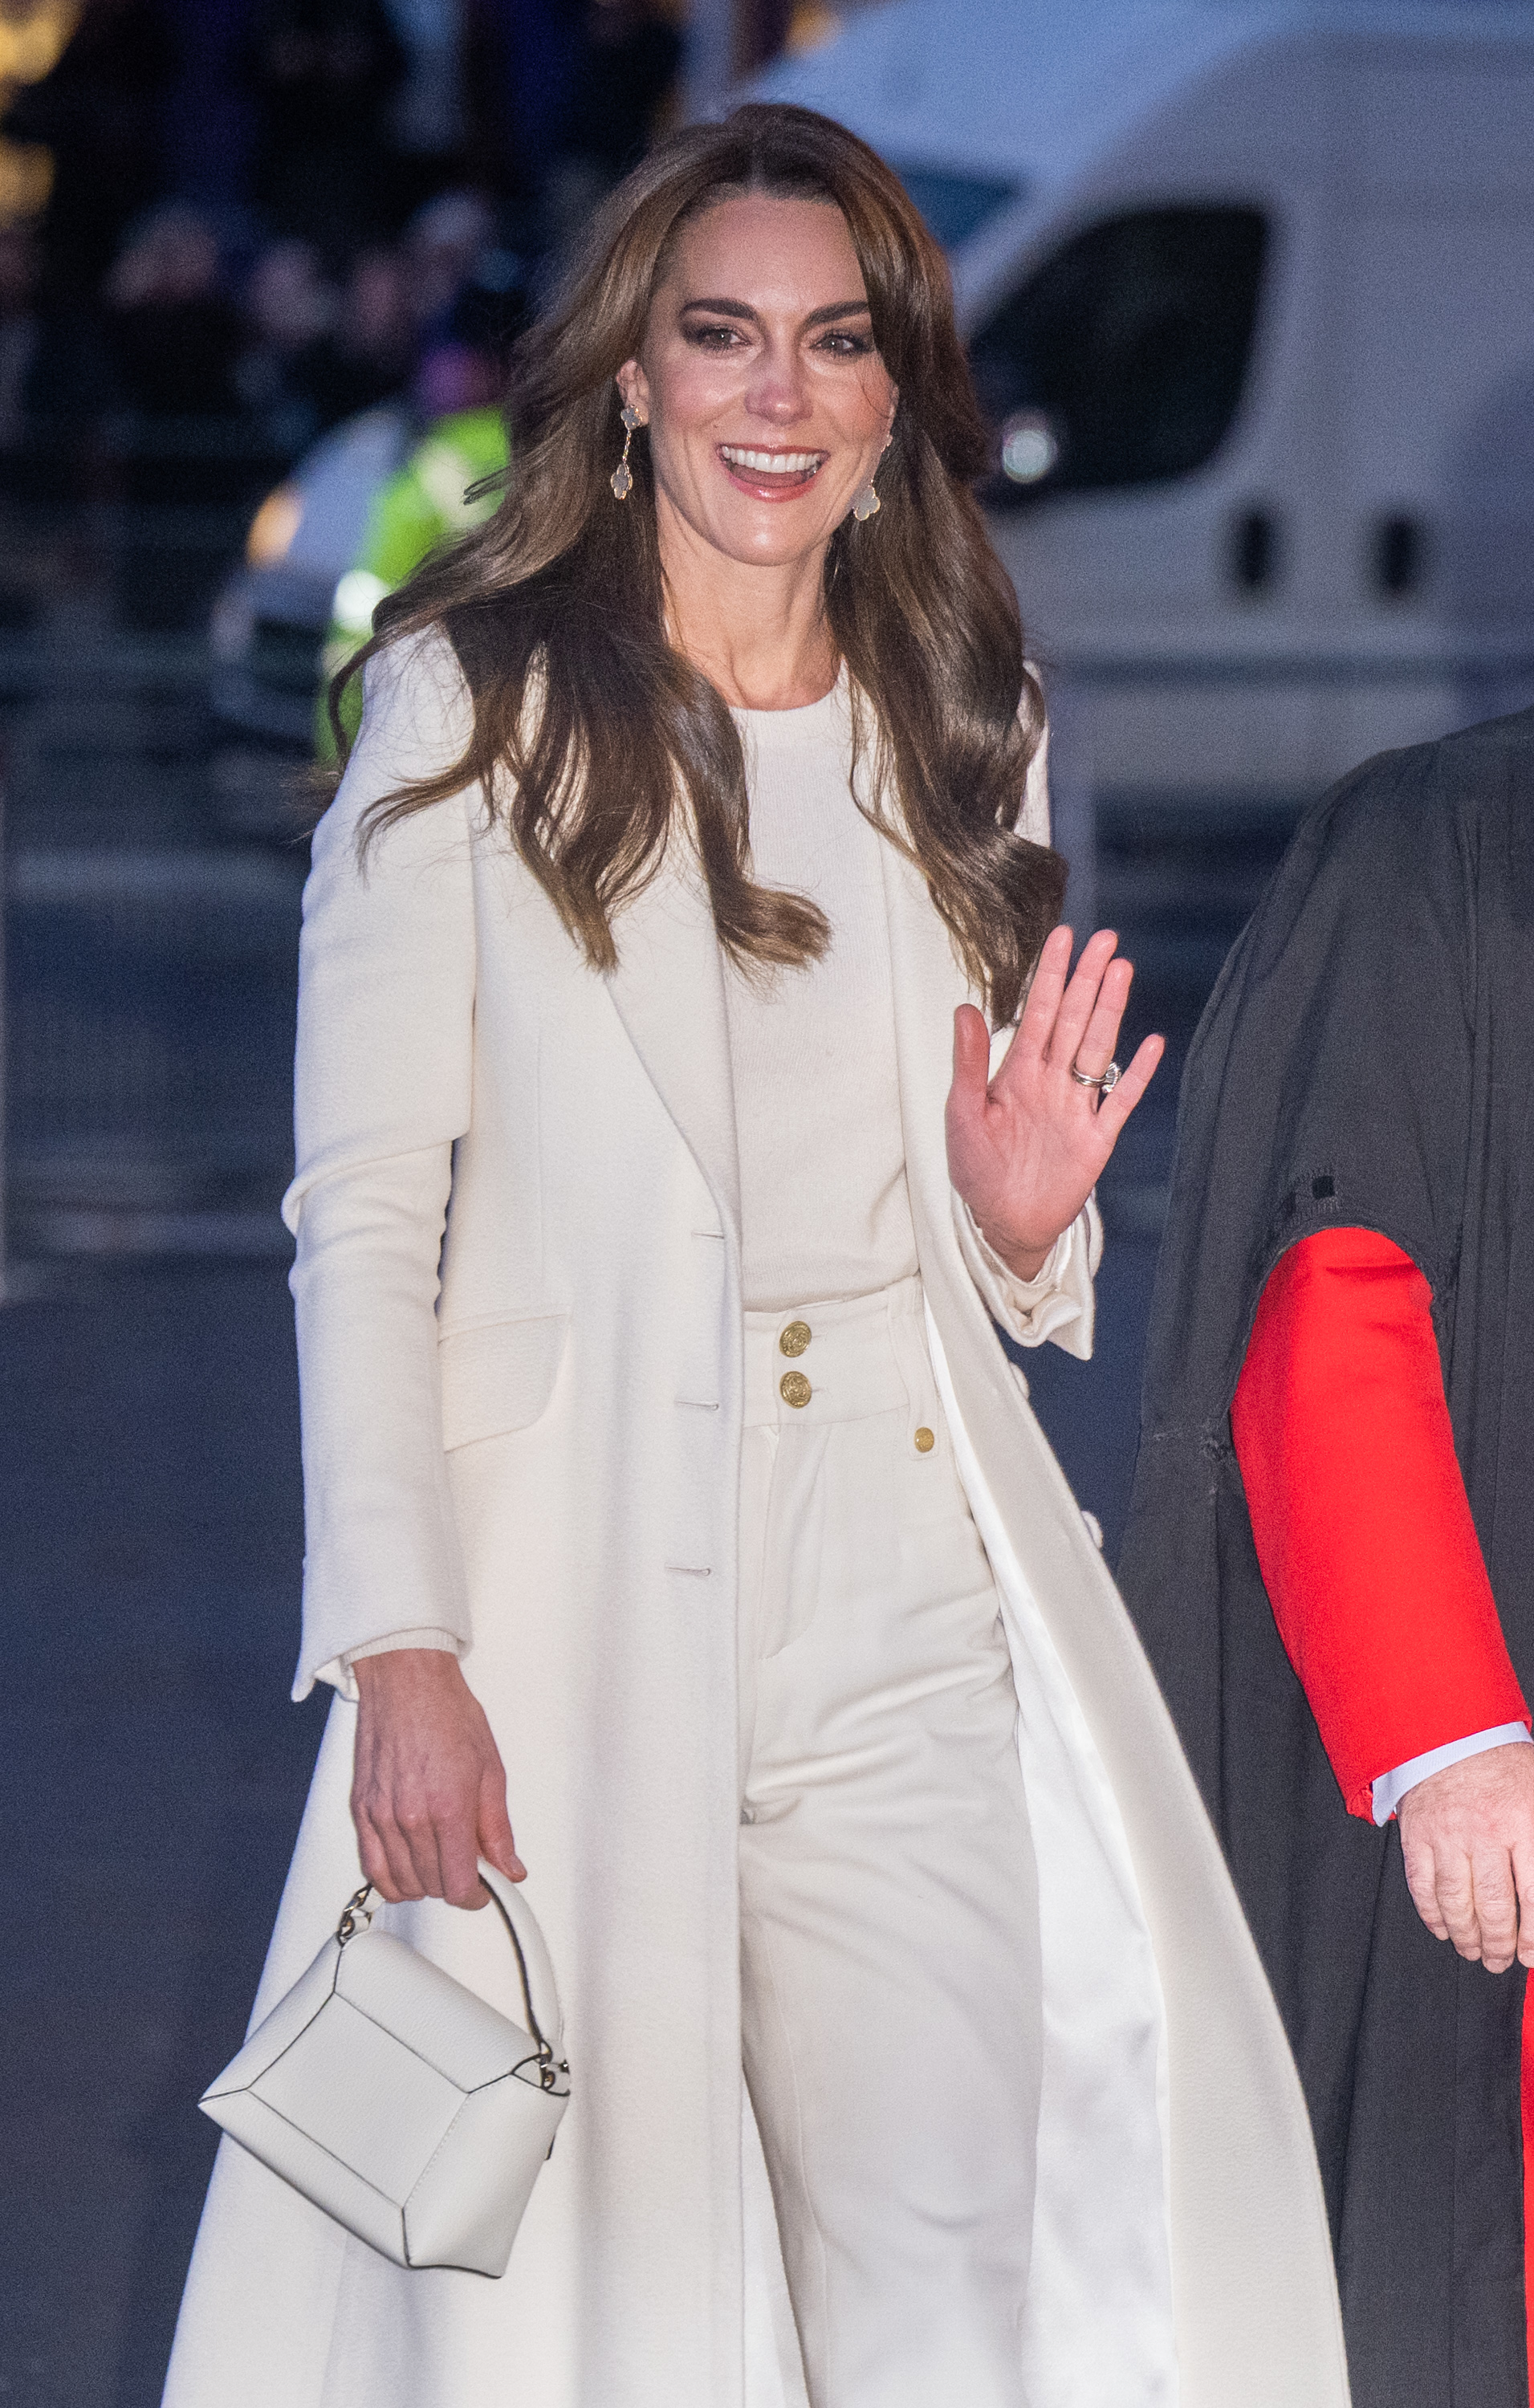 Kate in a coat and dress smiling and waving, surrounded by event attendees